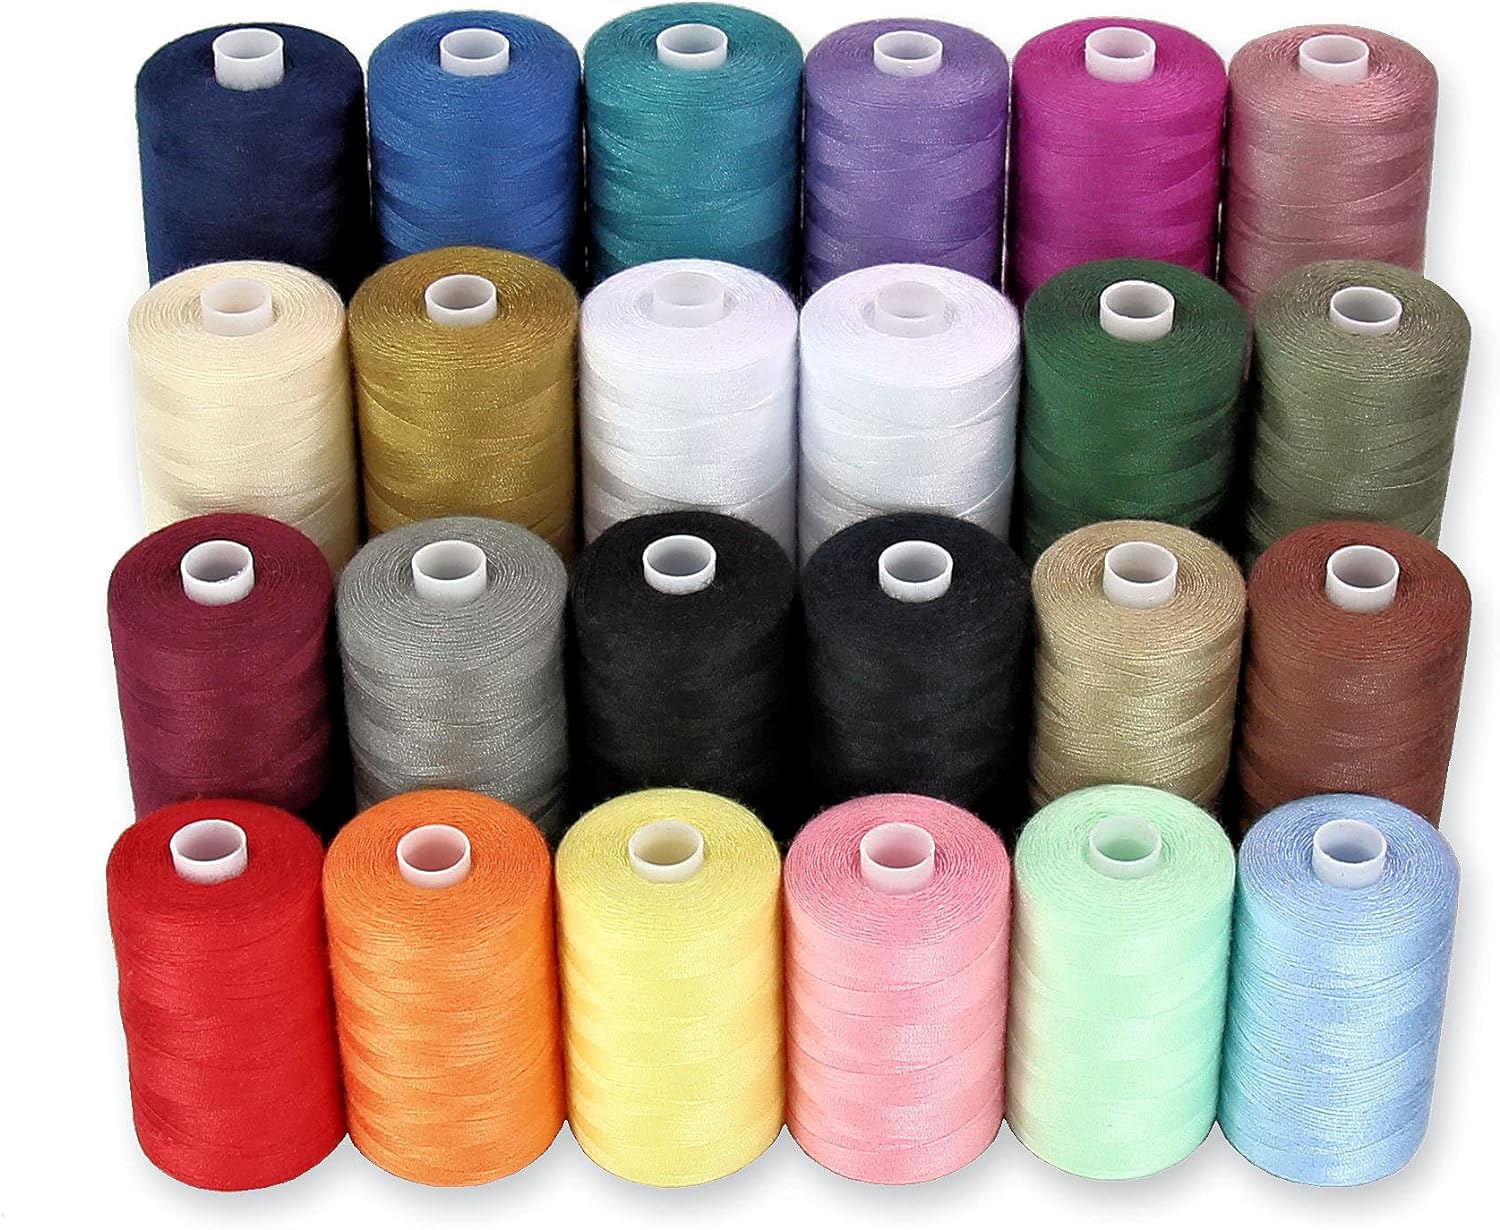 BlesSew Sewing Thread - 24 Polyester Threads for Hand Stitching, Quilting & Sewing Machine